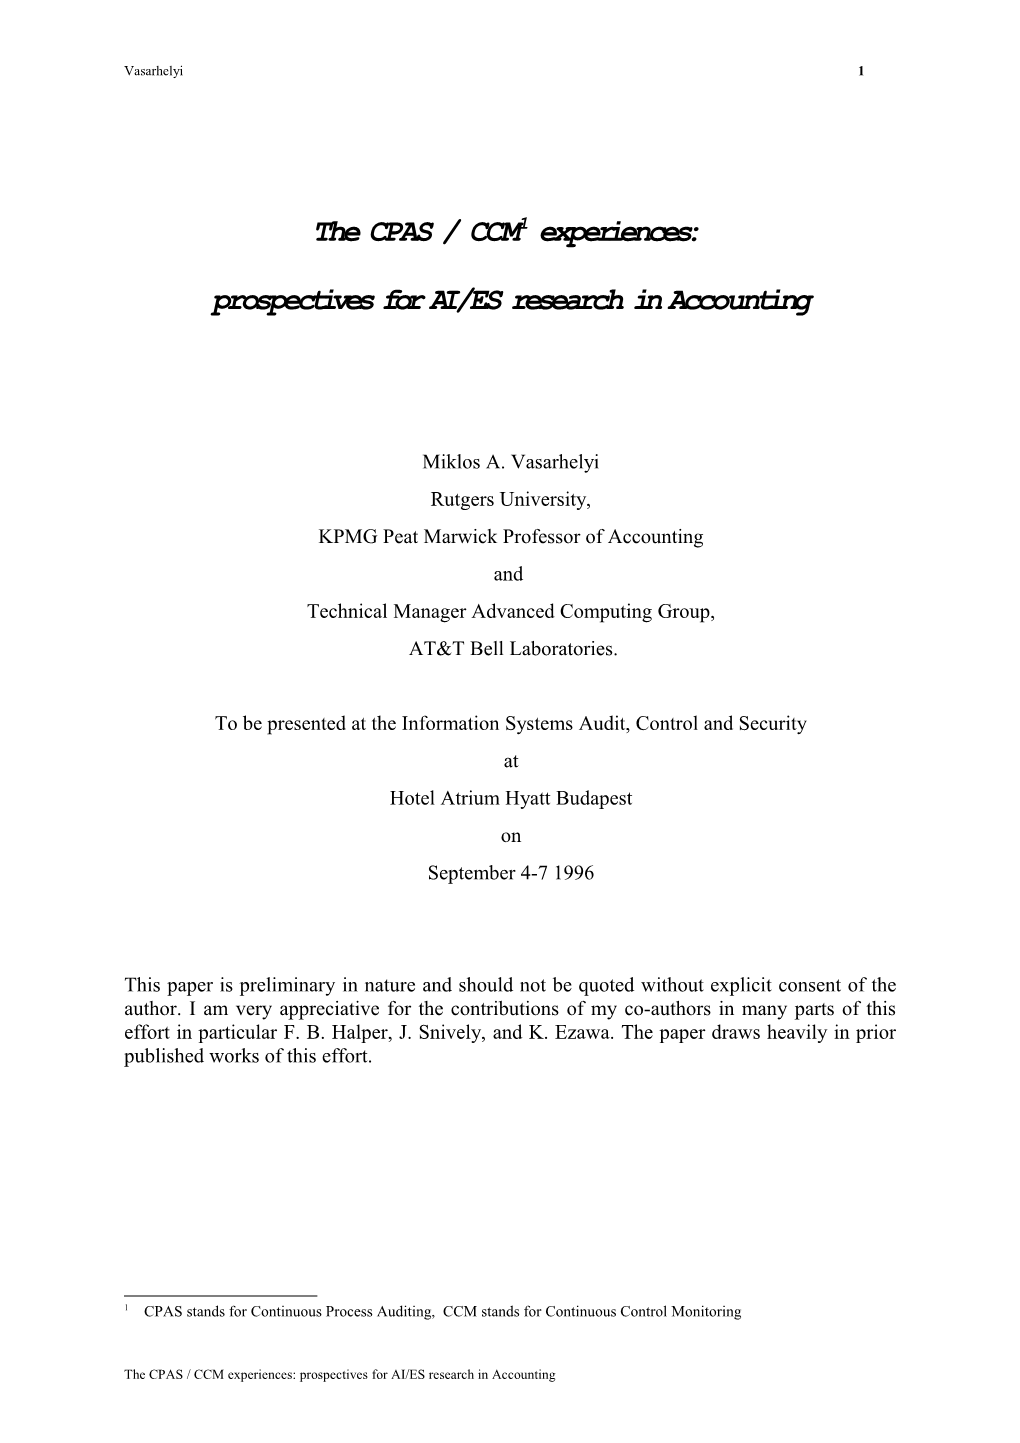 The CPAS / CCM Experiences: Prospectives for AI/ES Research in Accounting